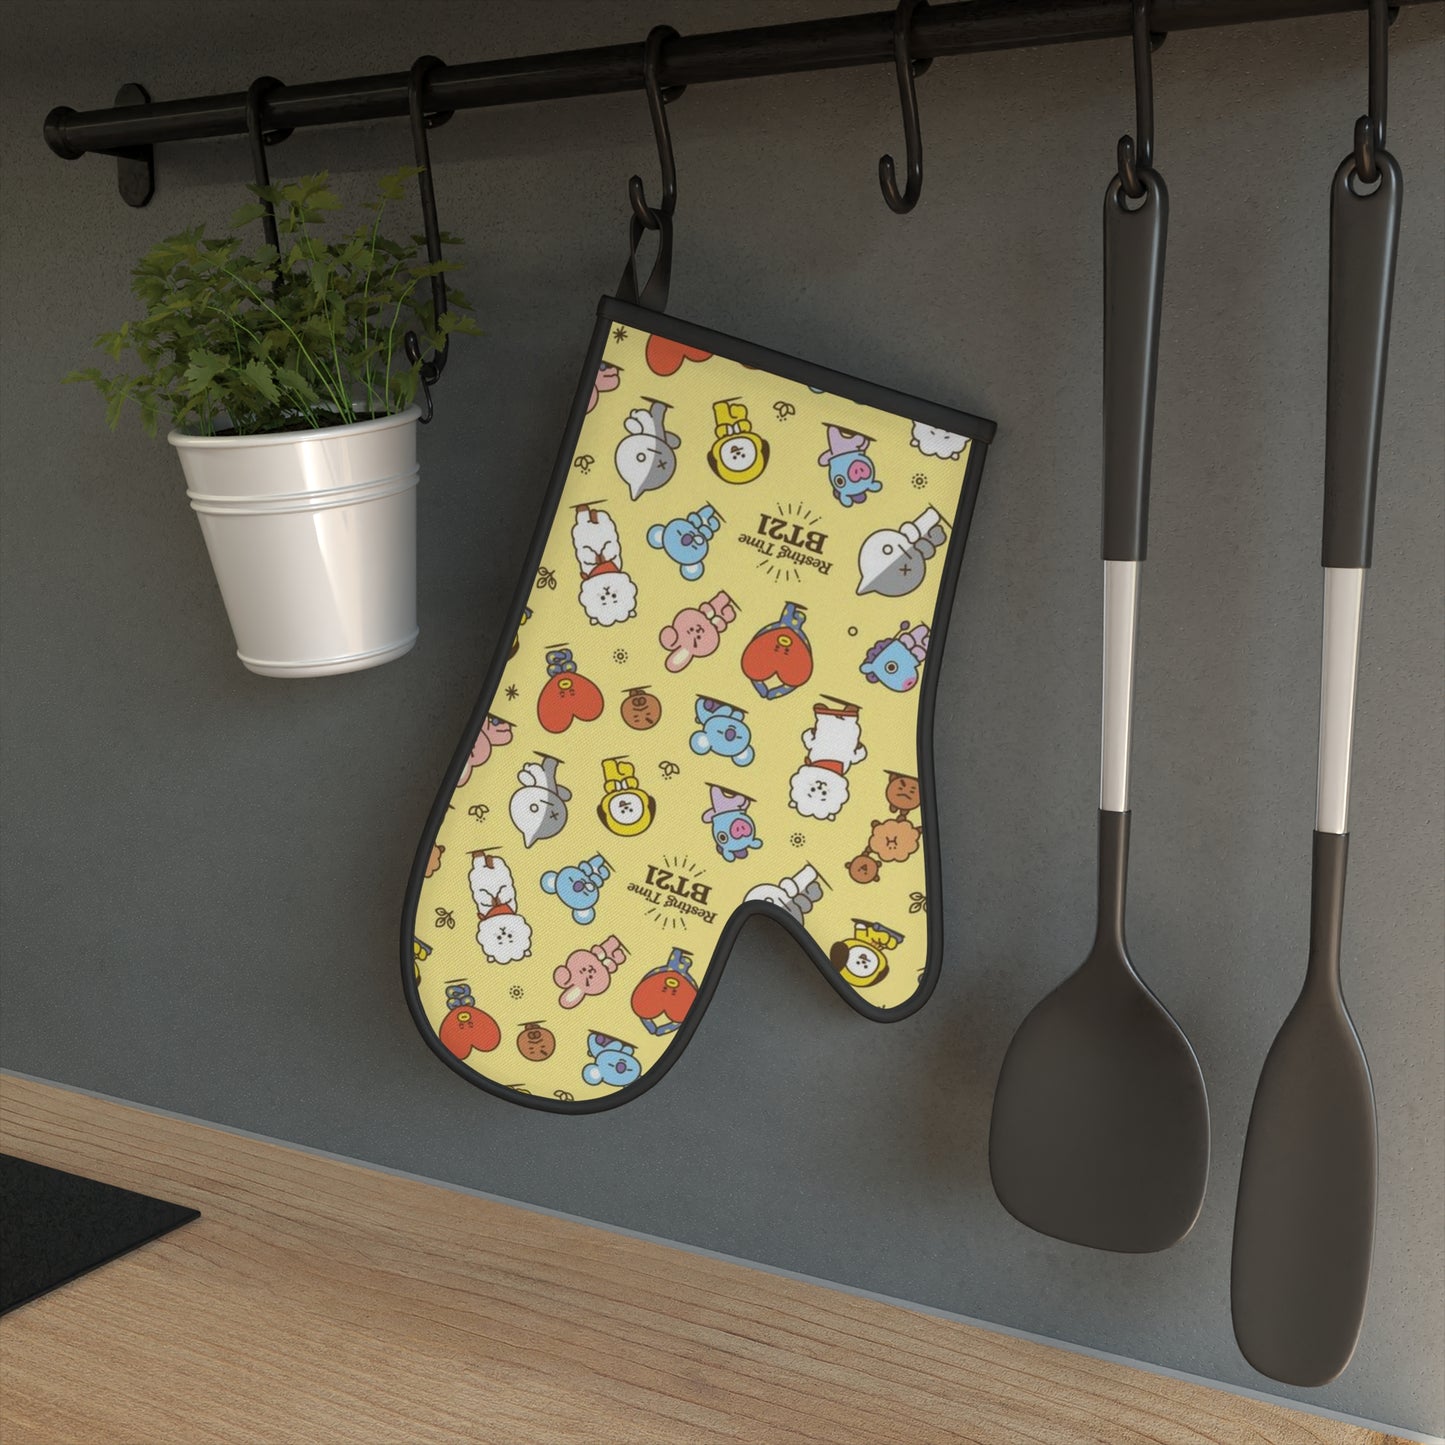 Oven Glove (Bts-Bt21 Collections)